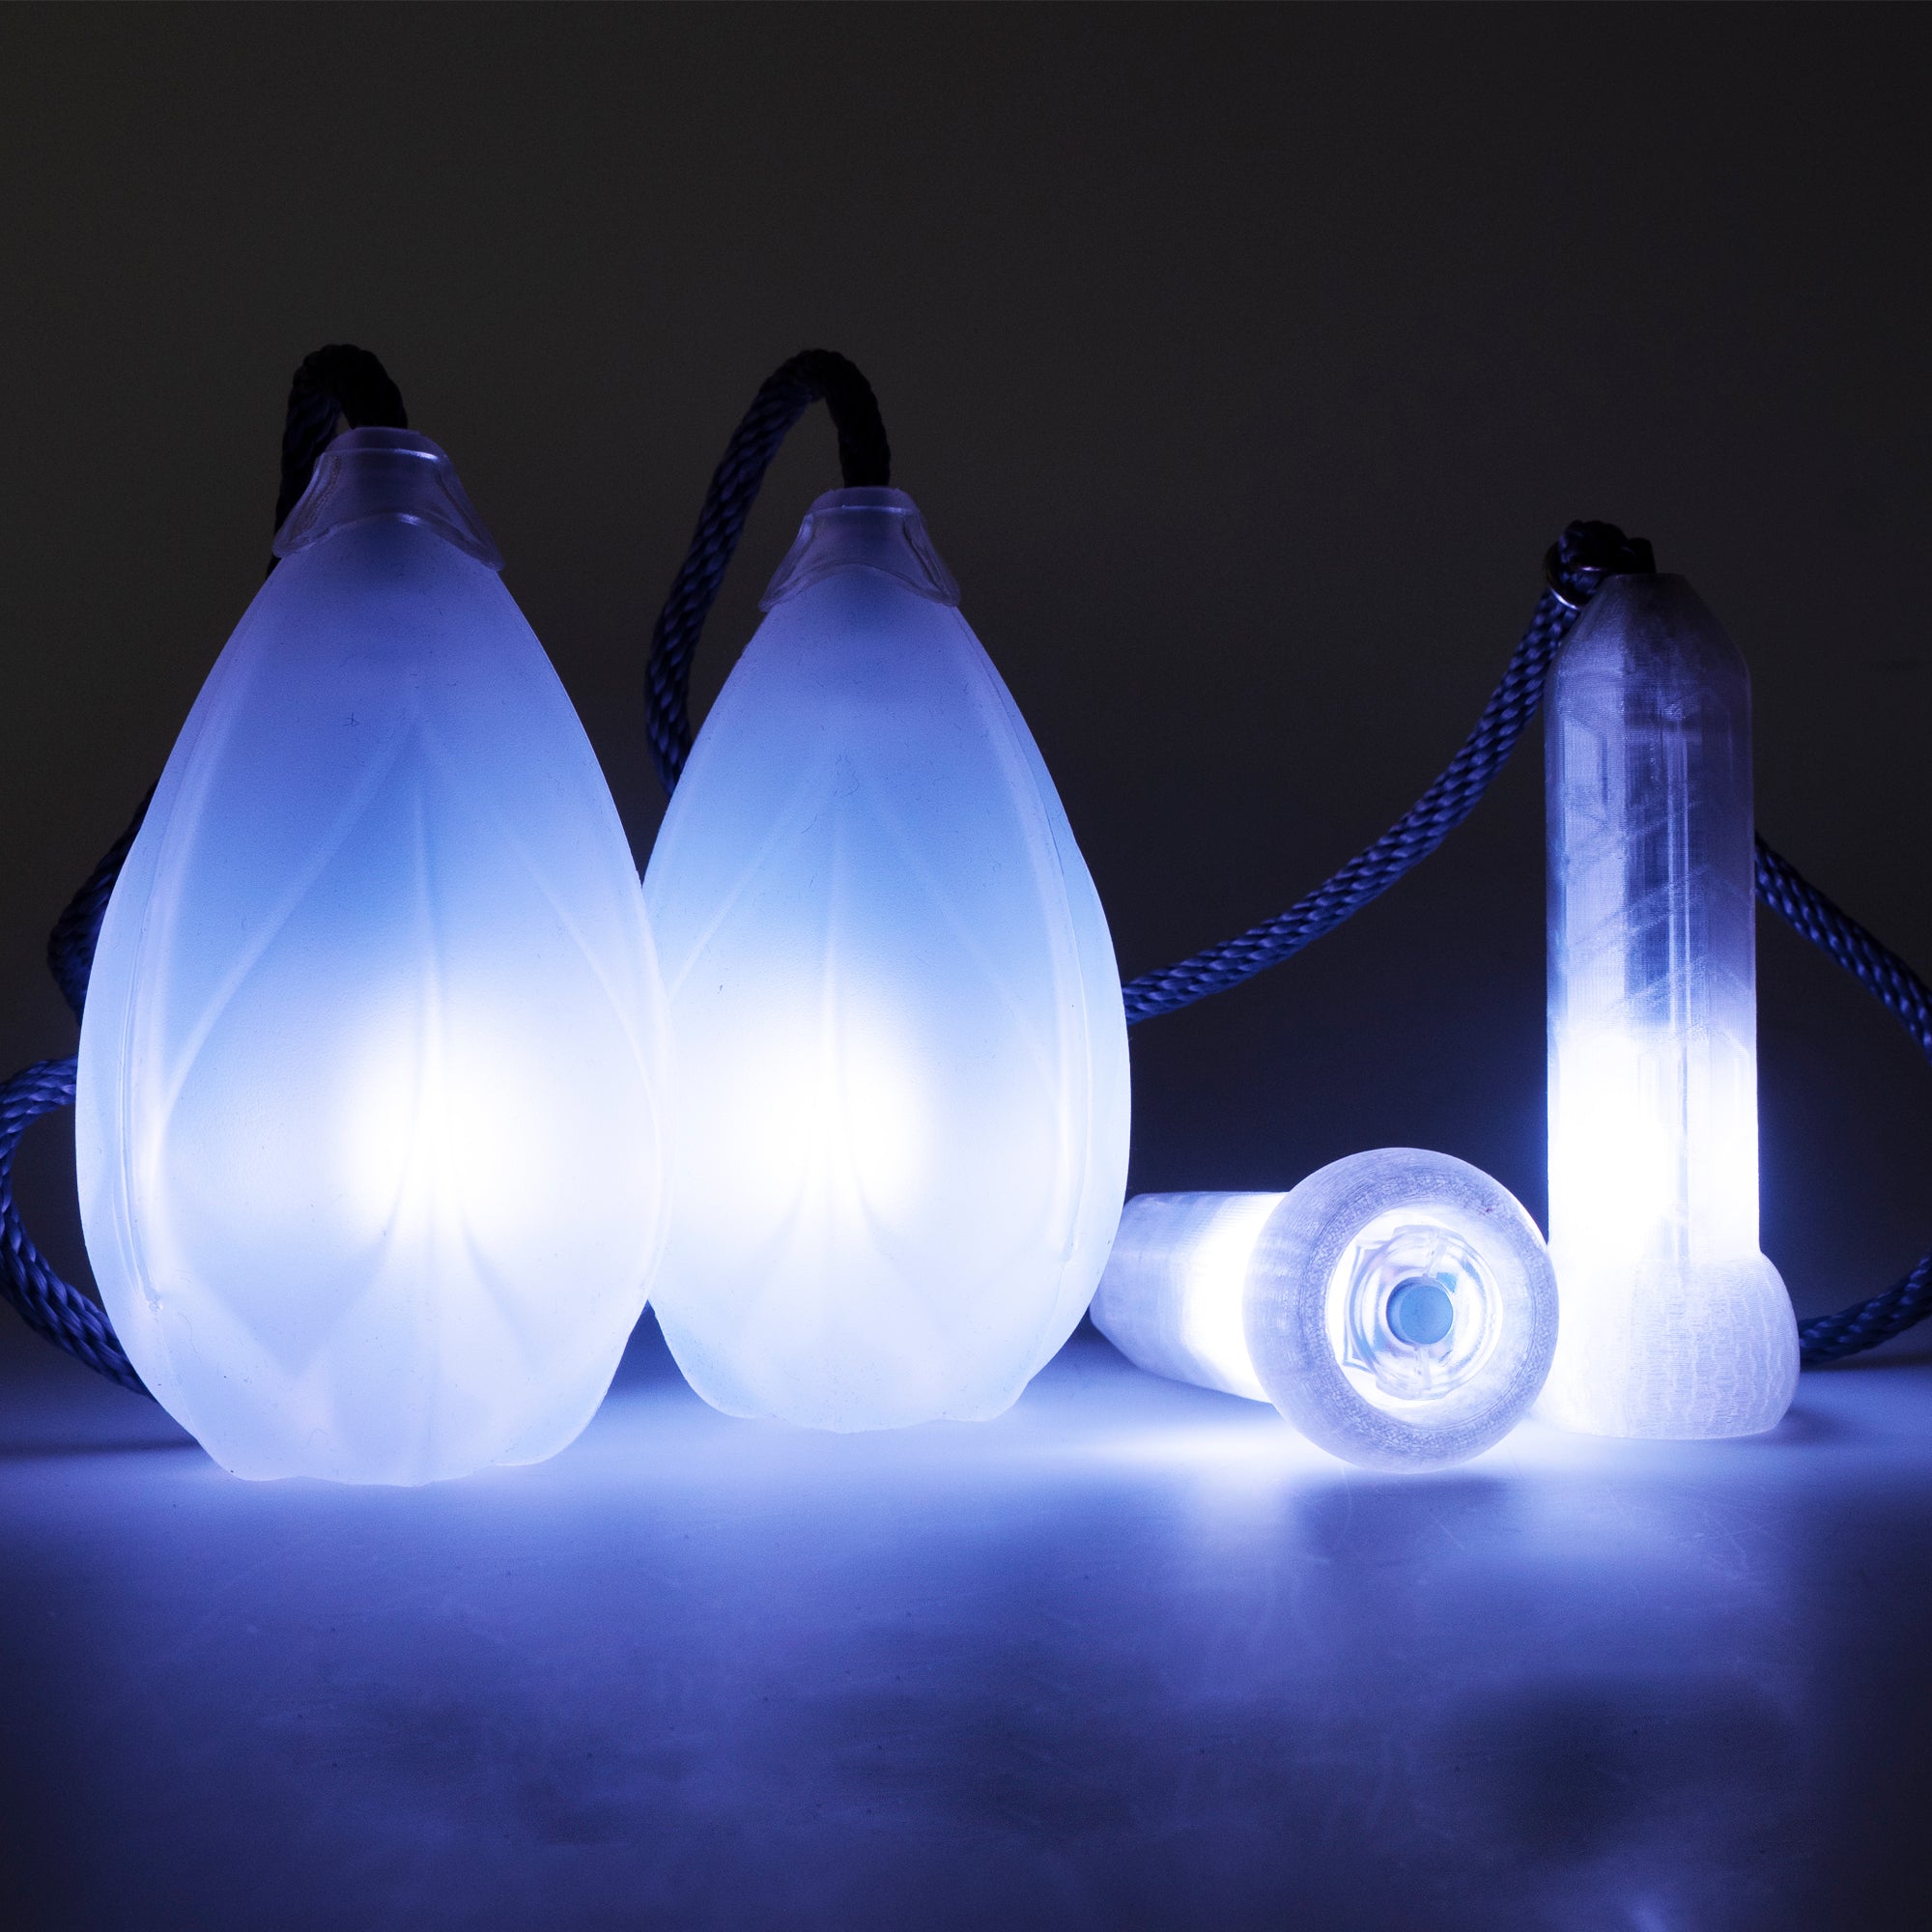 Flowtoys Podpoi v2 with capsule handles, all are glowing white and look bright